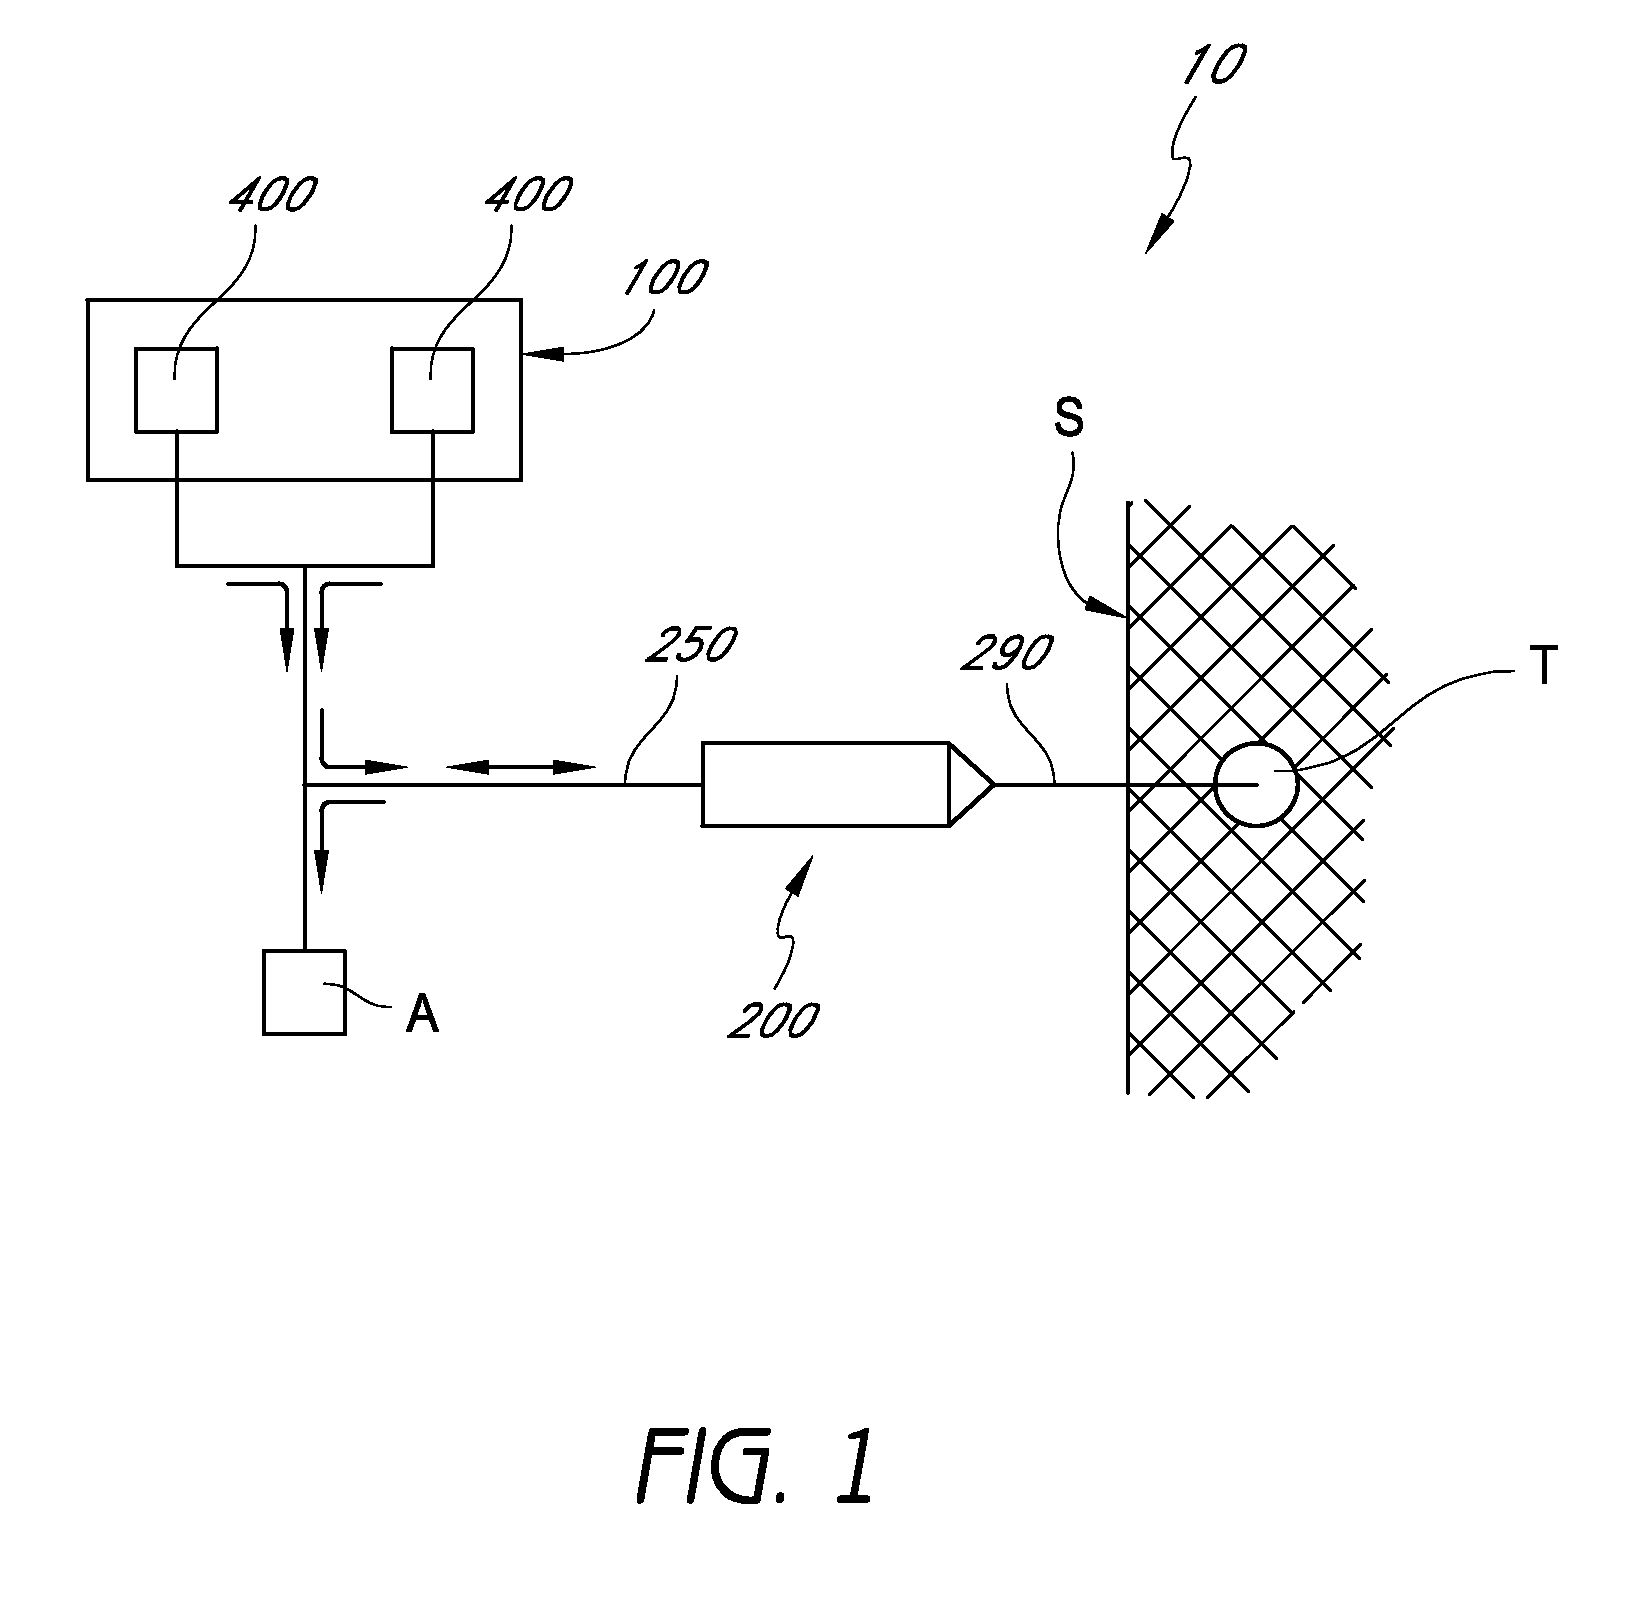 Method of treating a joint using an articular injection system